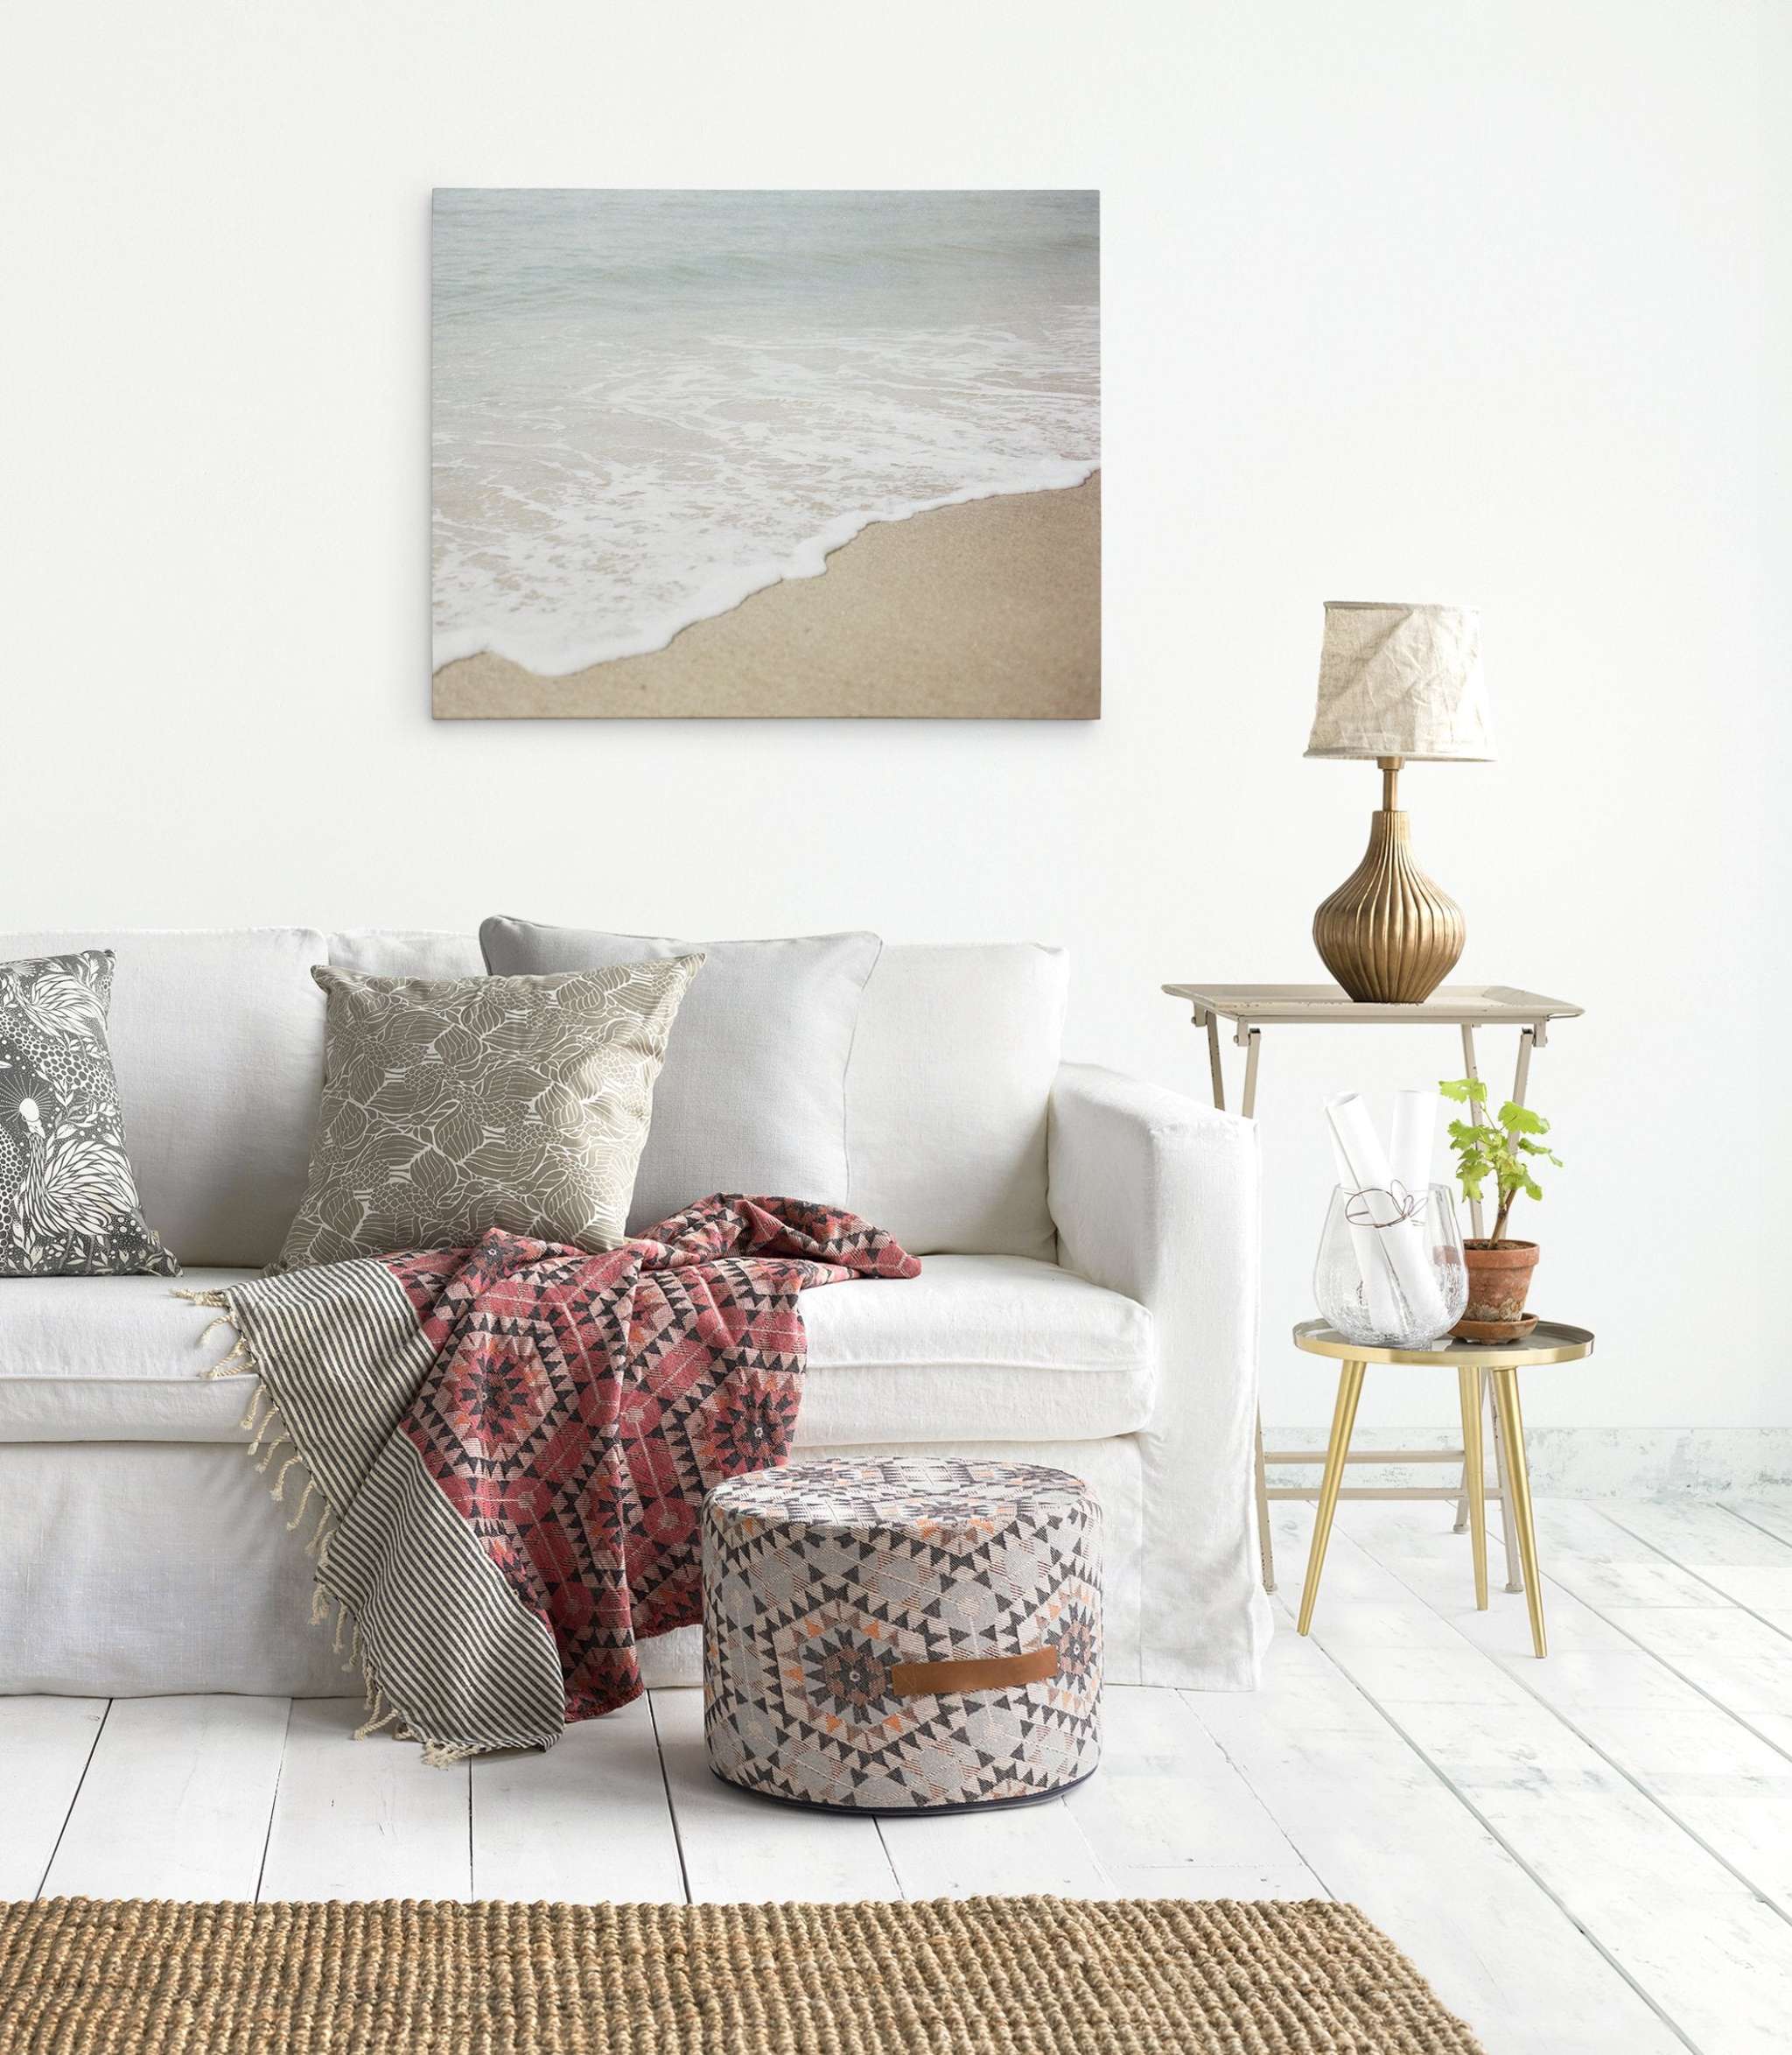 A bright living room features a white sofa with patterned cushions and a colorful throw. In front sits a patterned pouf. A side table holds a decorative lamp, a glass vase, and a potted plant. Above the sofa, an Offley Green Beach Waves Canvas Wall Art, &#39;Chasing Surf&#39; adorns the wall.